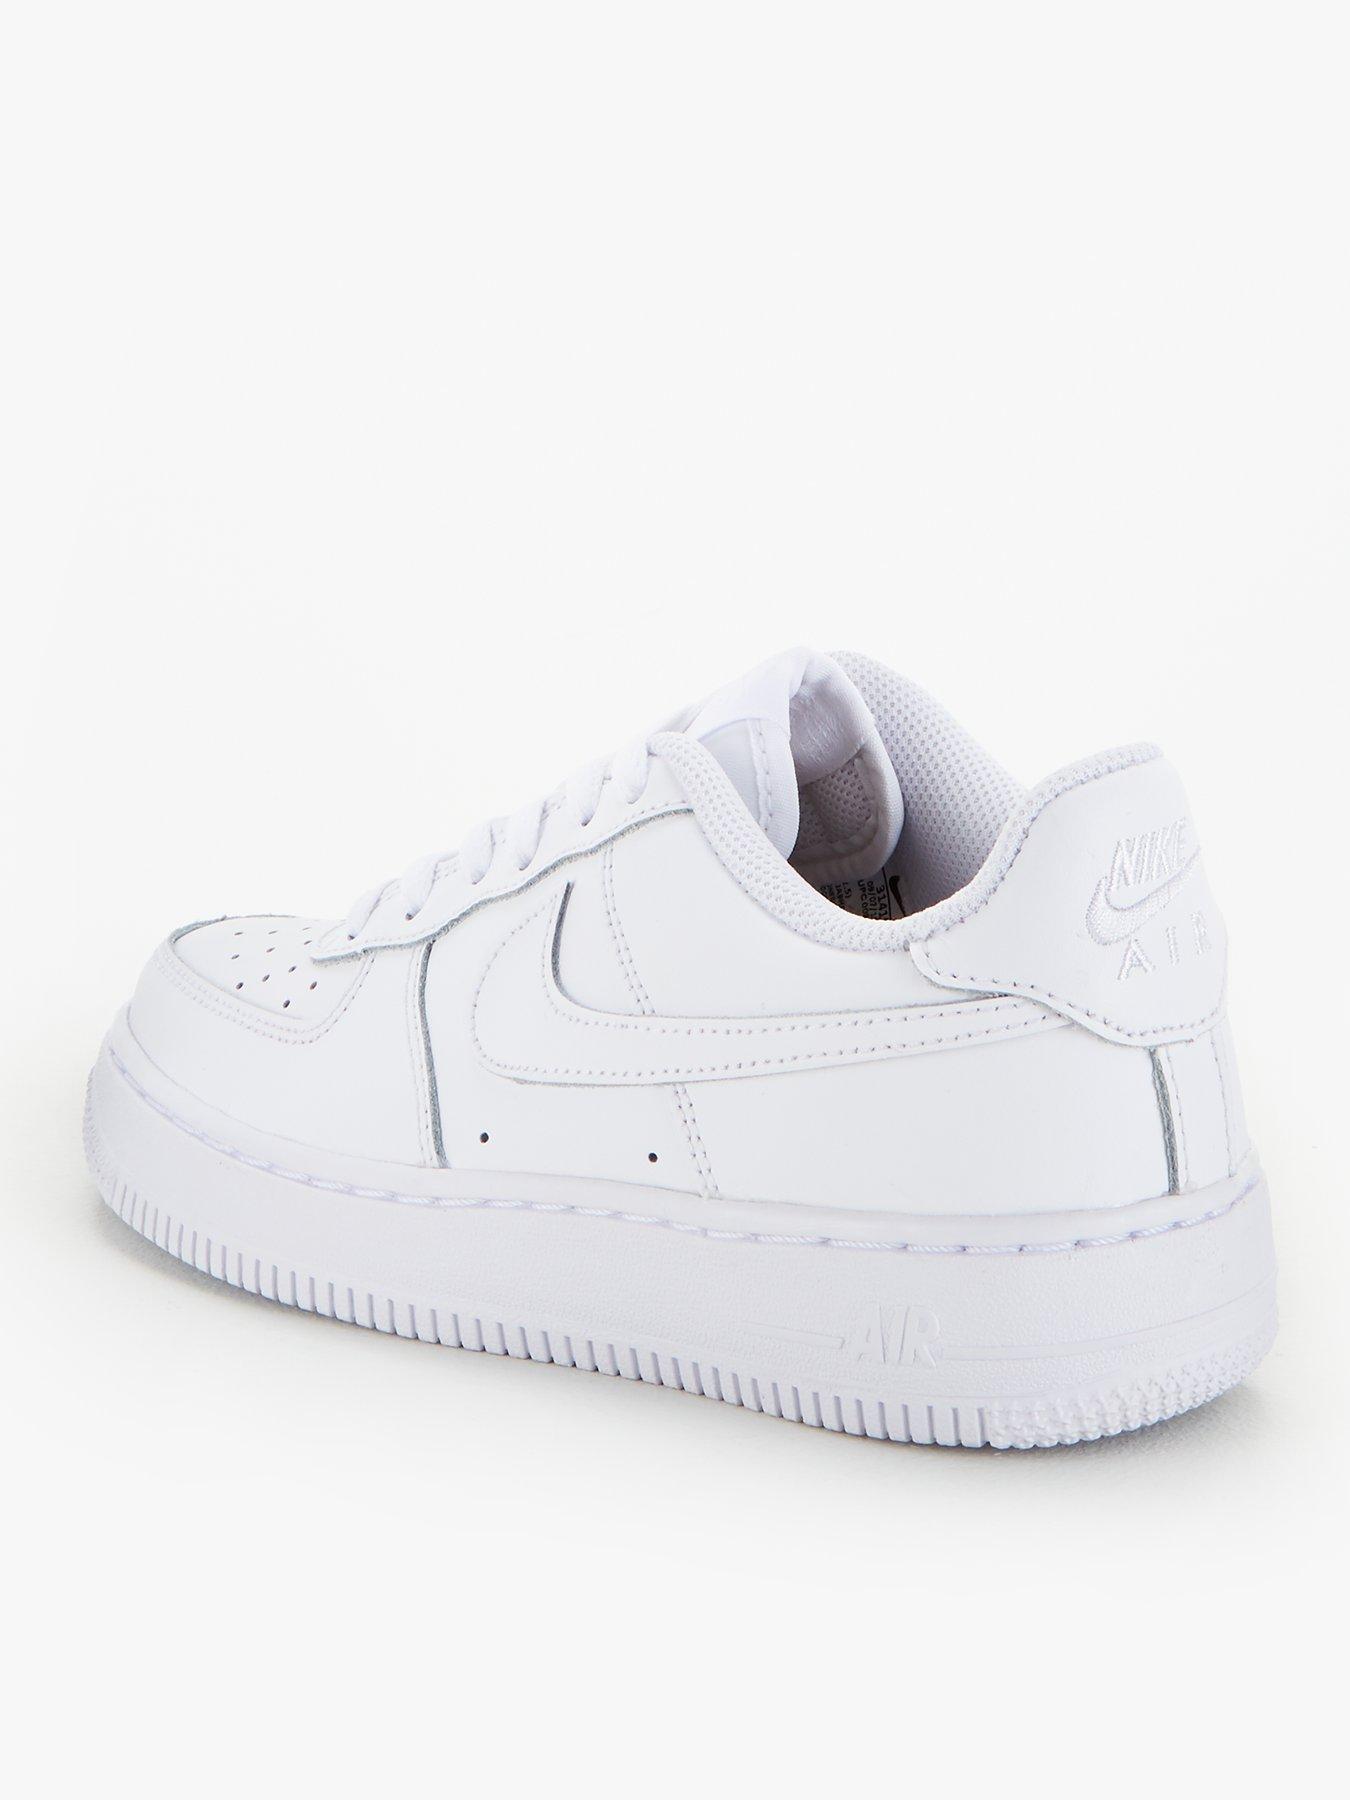 nike air force 1 size 4 junior